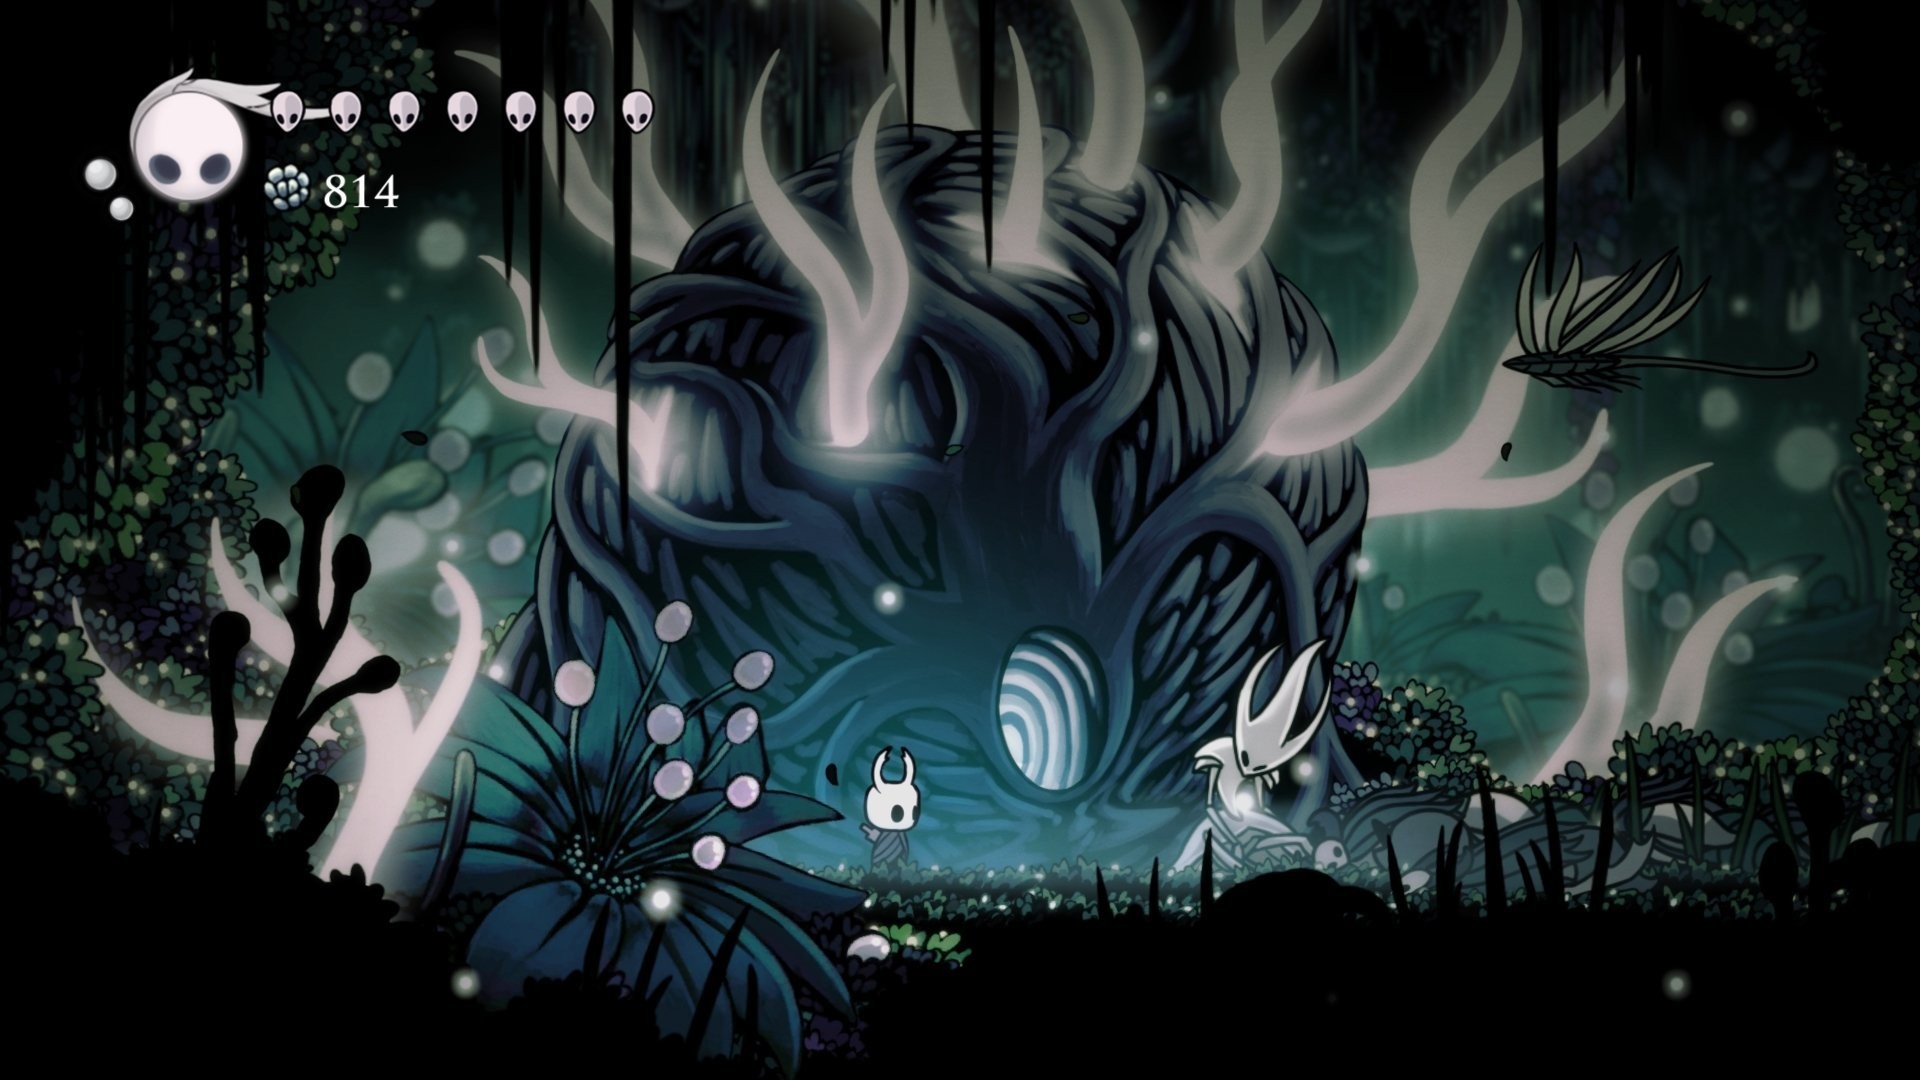 Hollow Knight Game HD Wallpaper with high-resolution 1920x1080 pixel. You can use this wallpaper for your Windows and Mac OS computers as well as your Android and iPhone smartphones